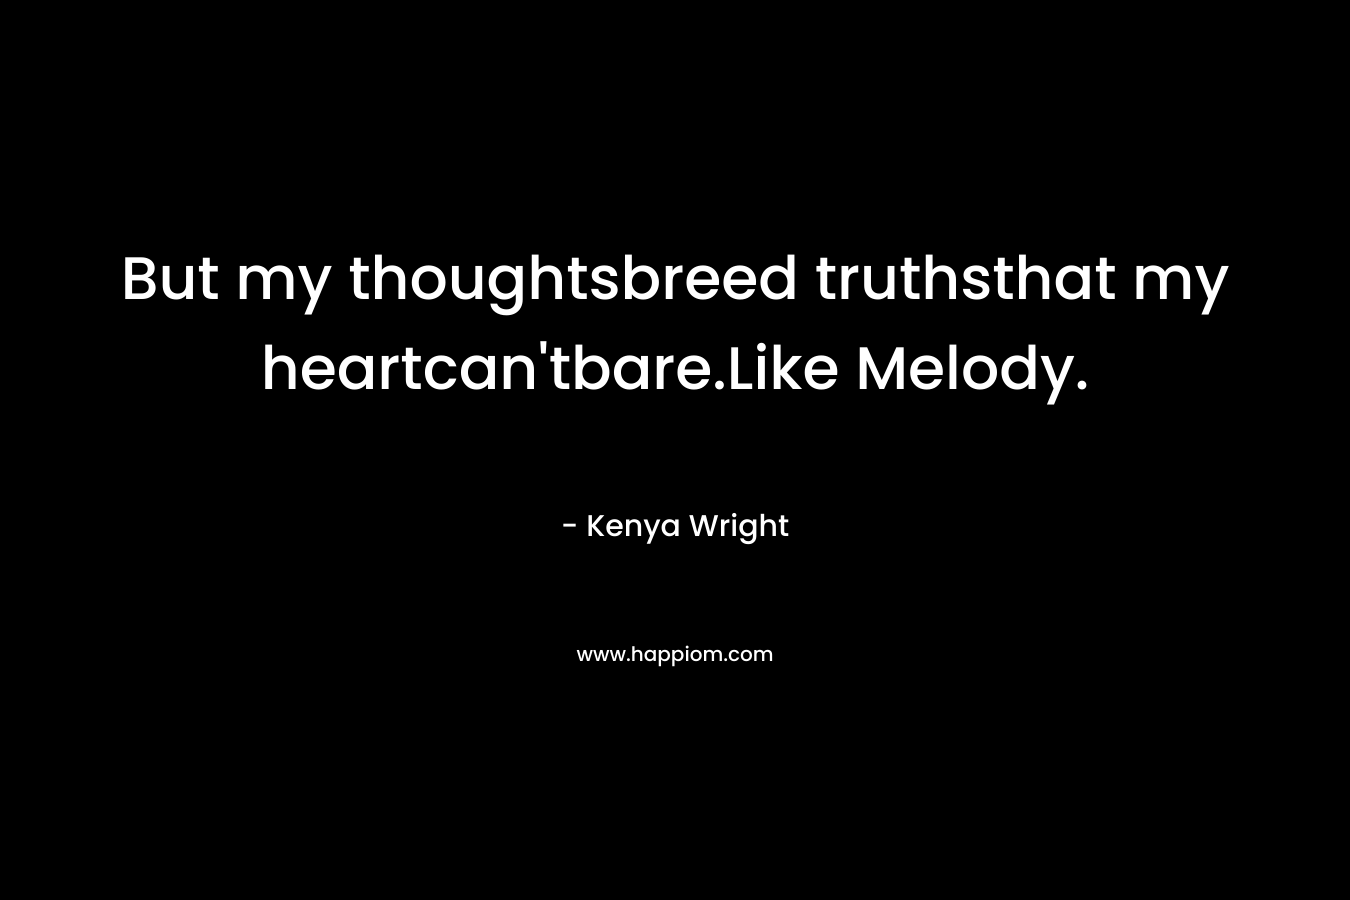 But my thoughtsbreed truthsthat my heartcan'tbare.Like Melody.